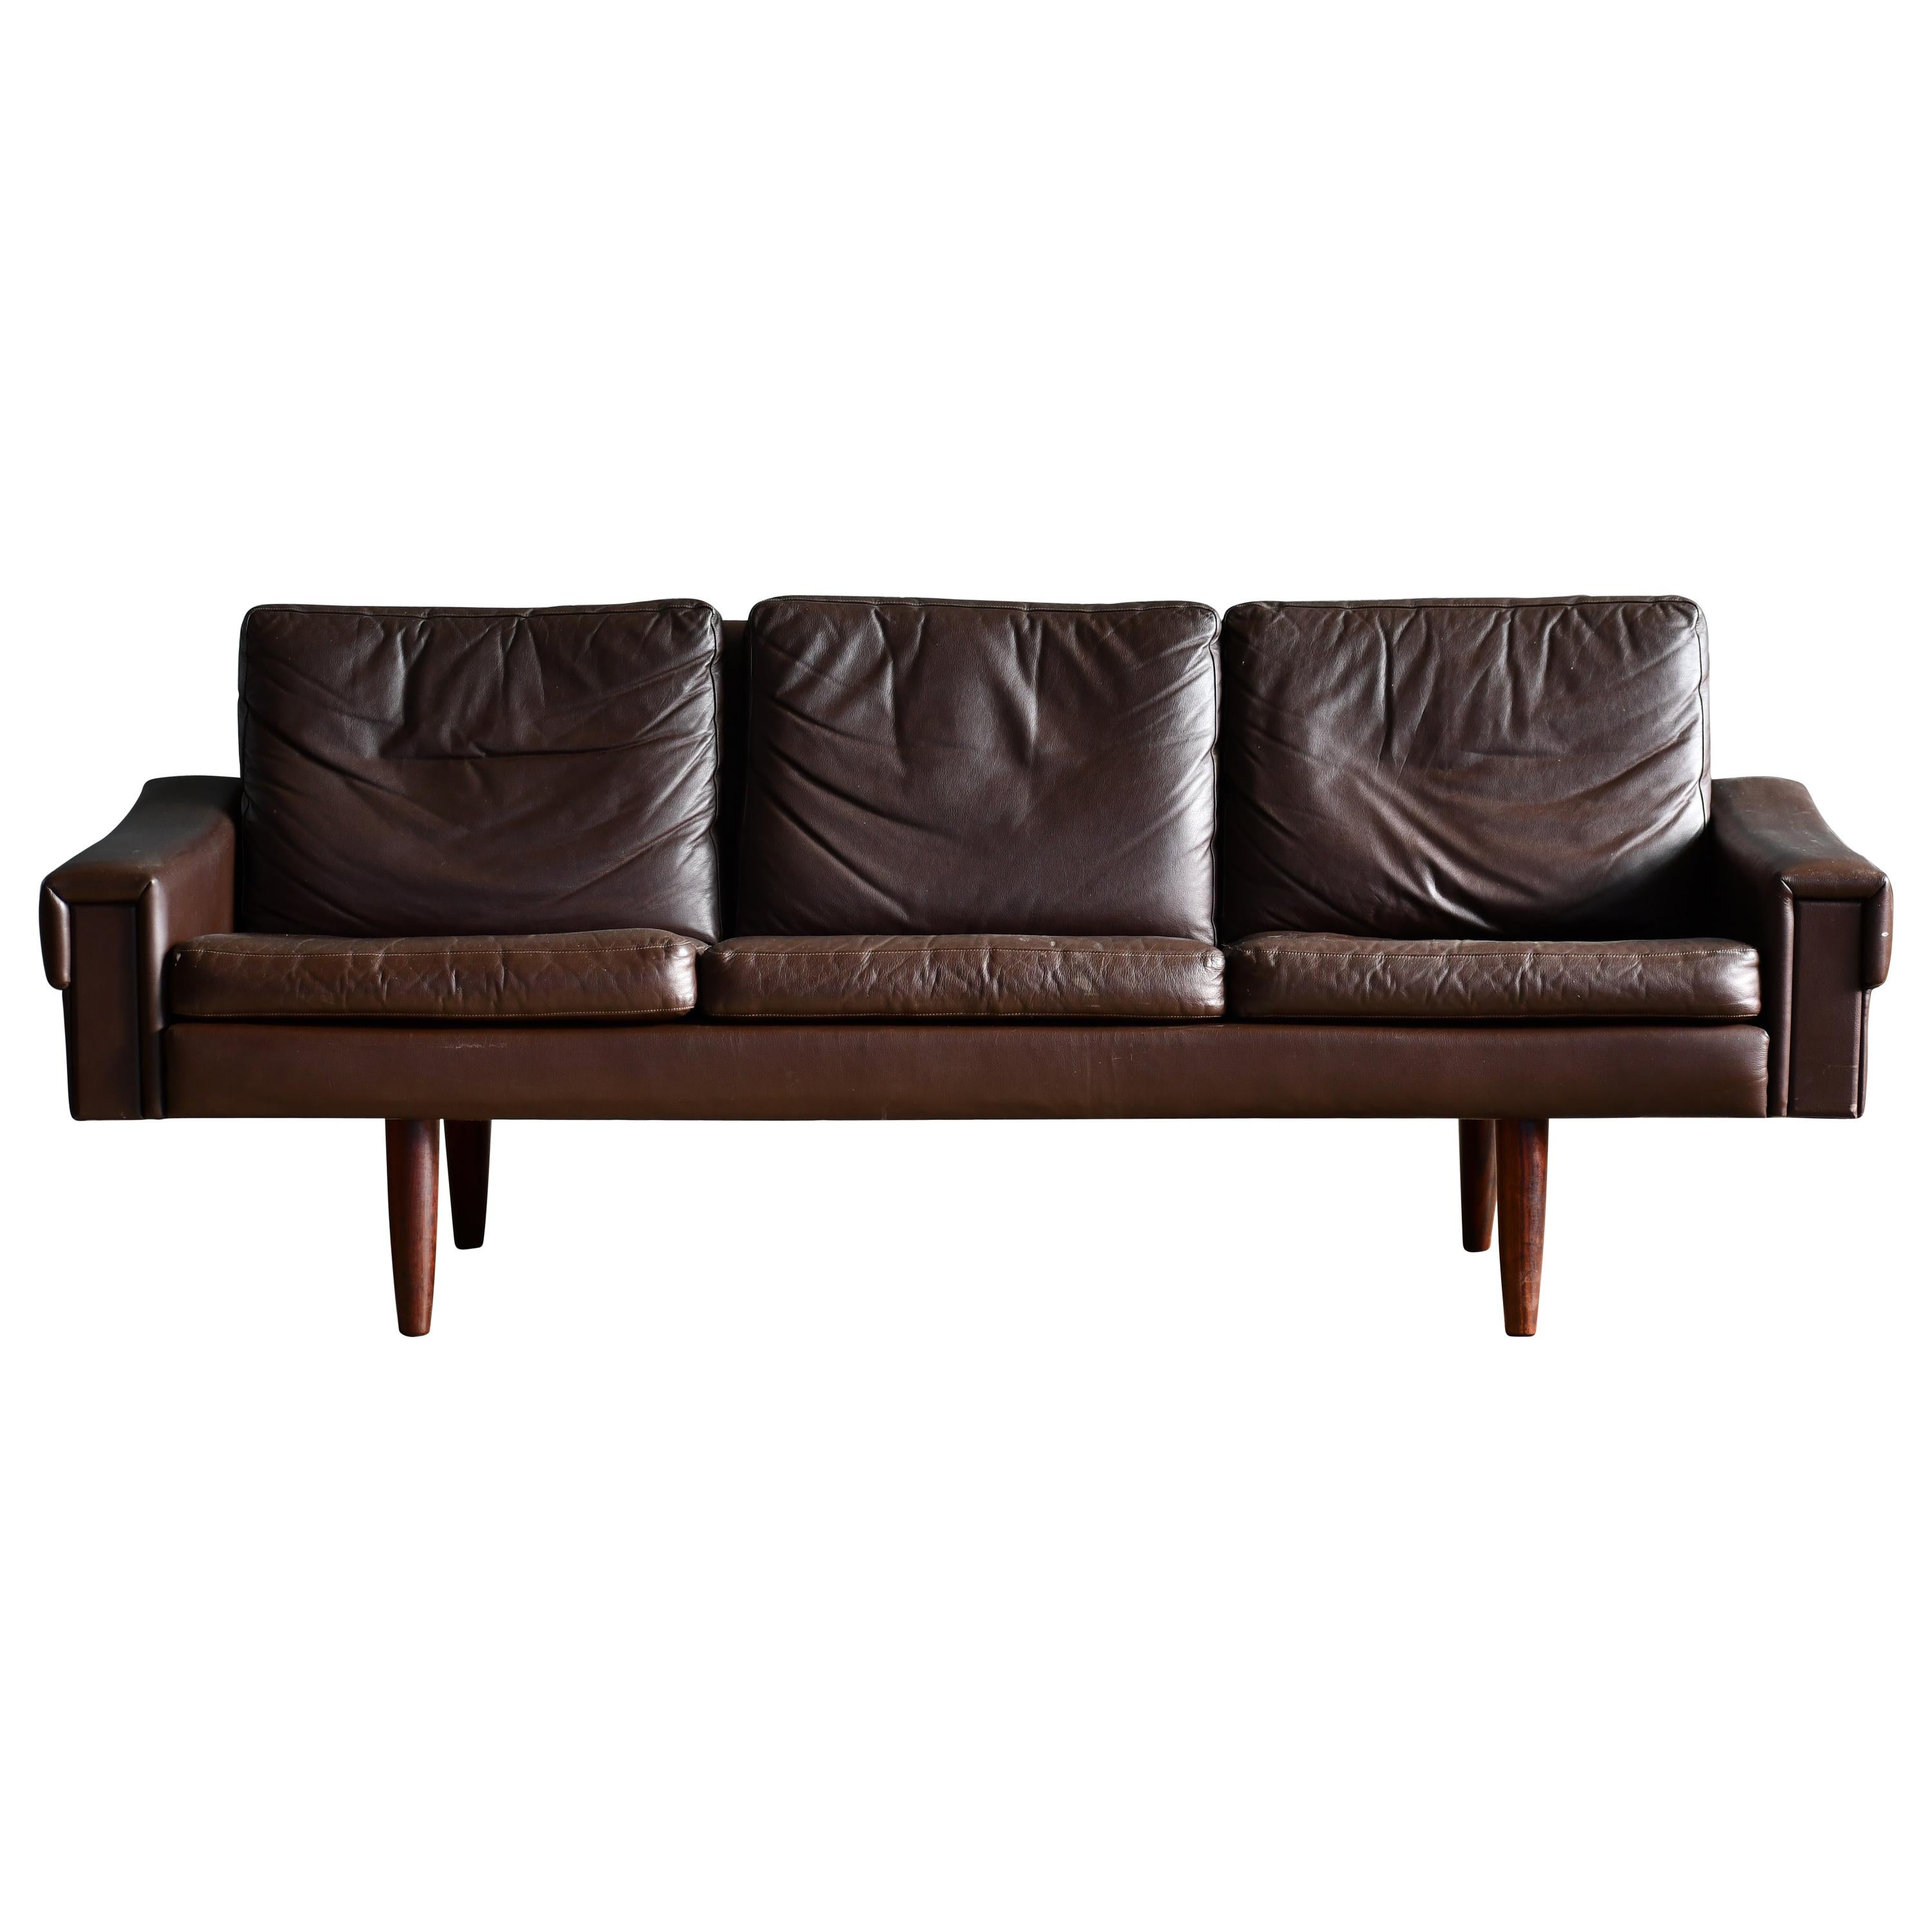 Classic Danish 1960s Midcentury Sofa in Chestnut Colored Leather by Georg Thams